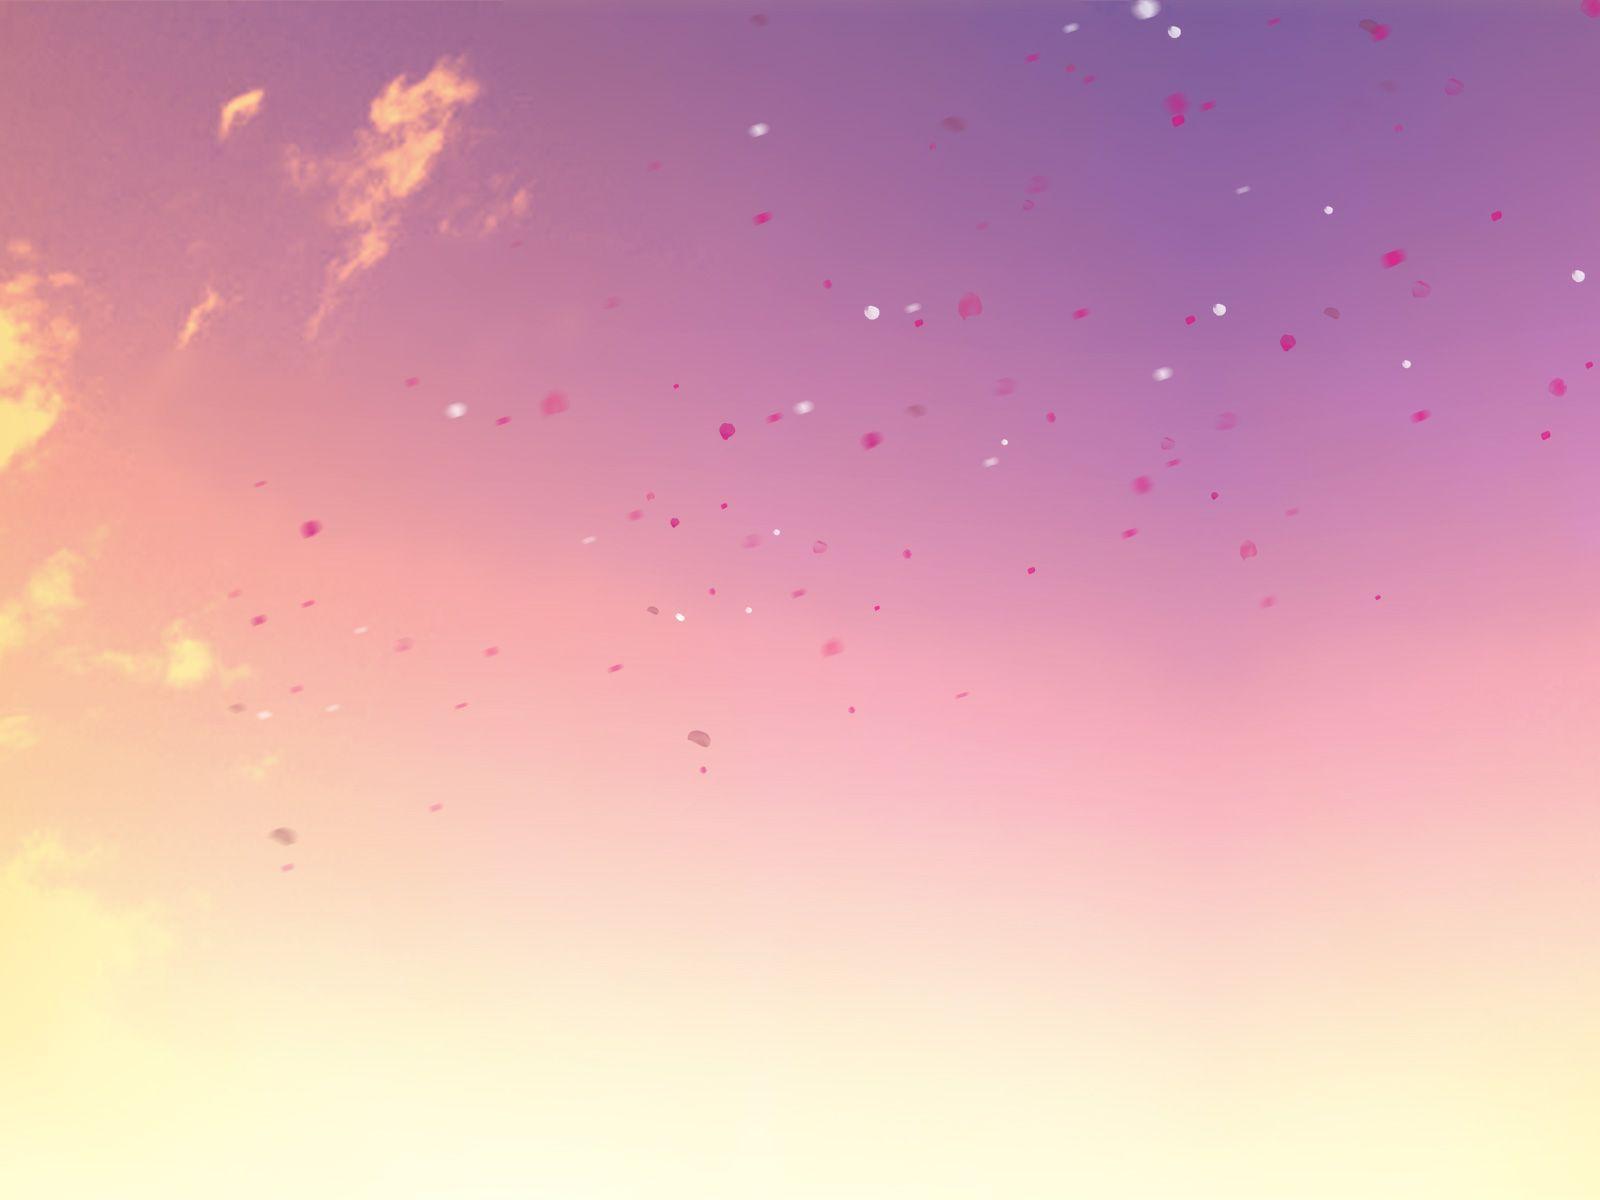 cute pastel tumblr backgrounds